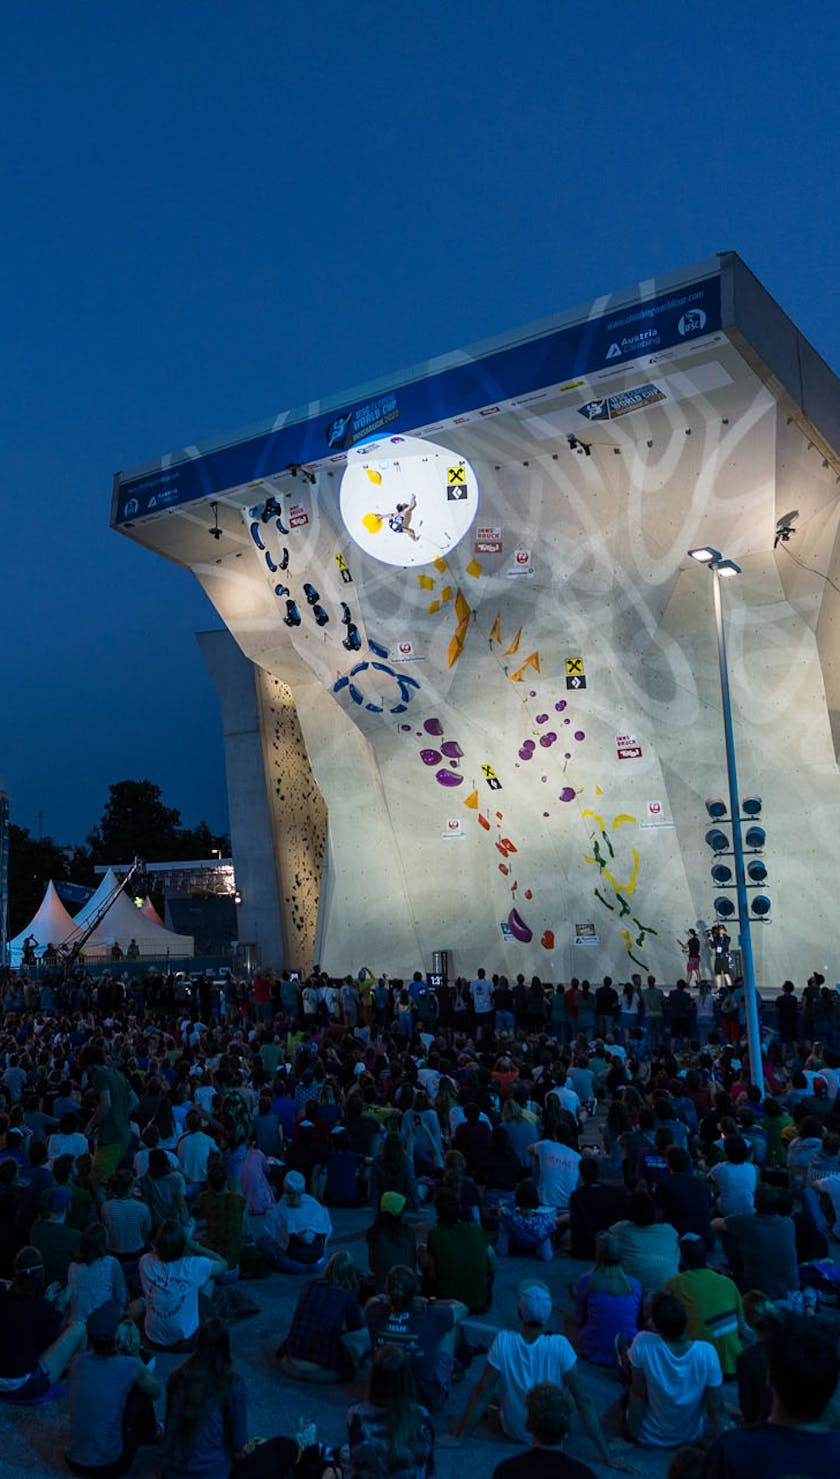 The crowd at the climbing world cup